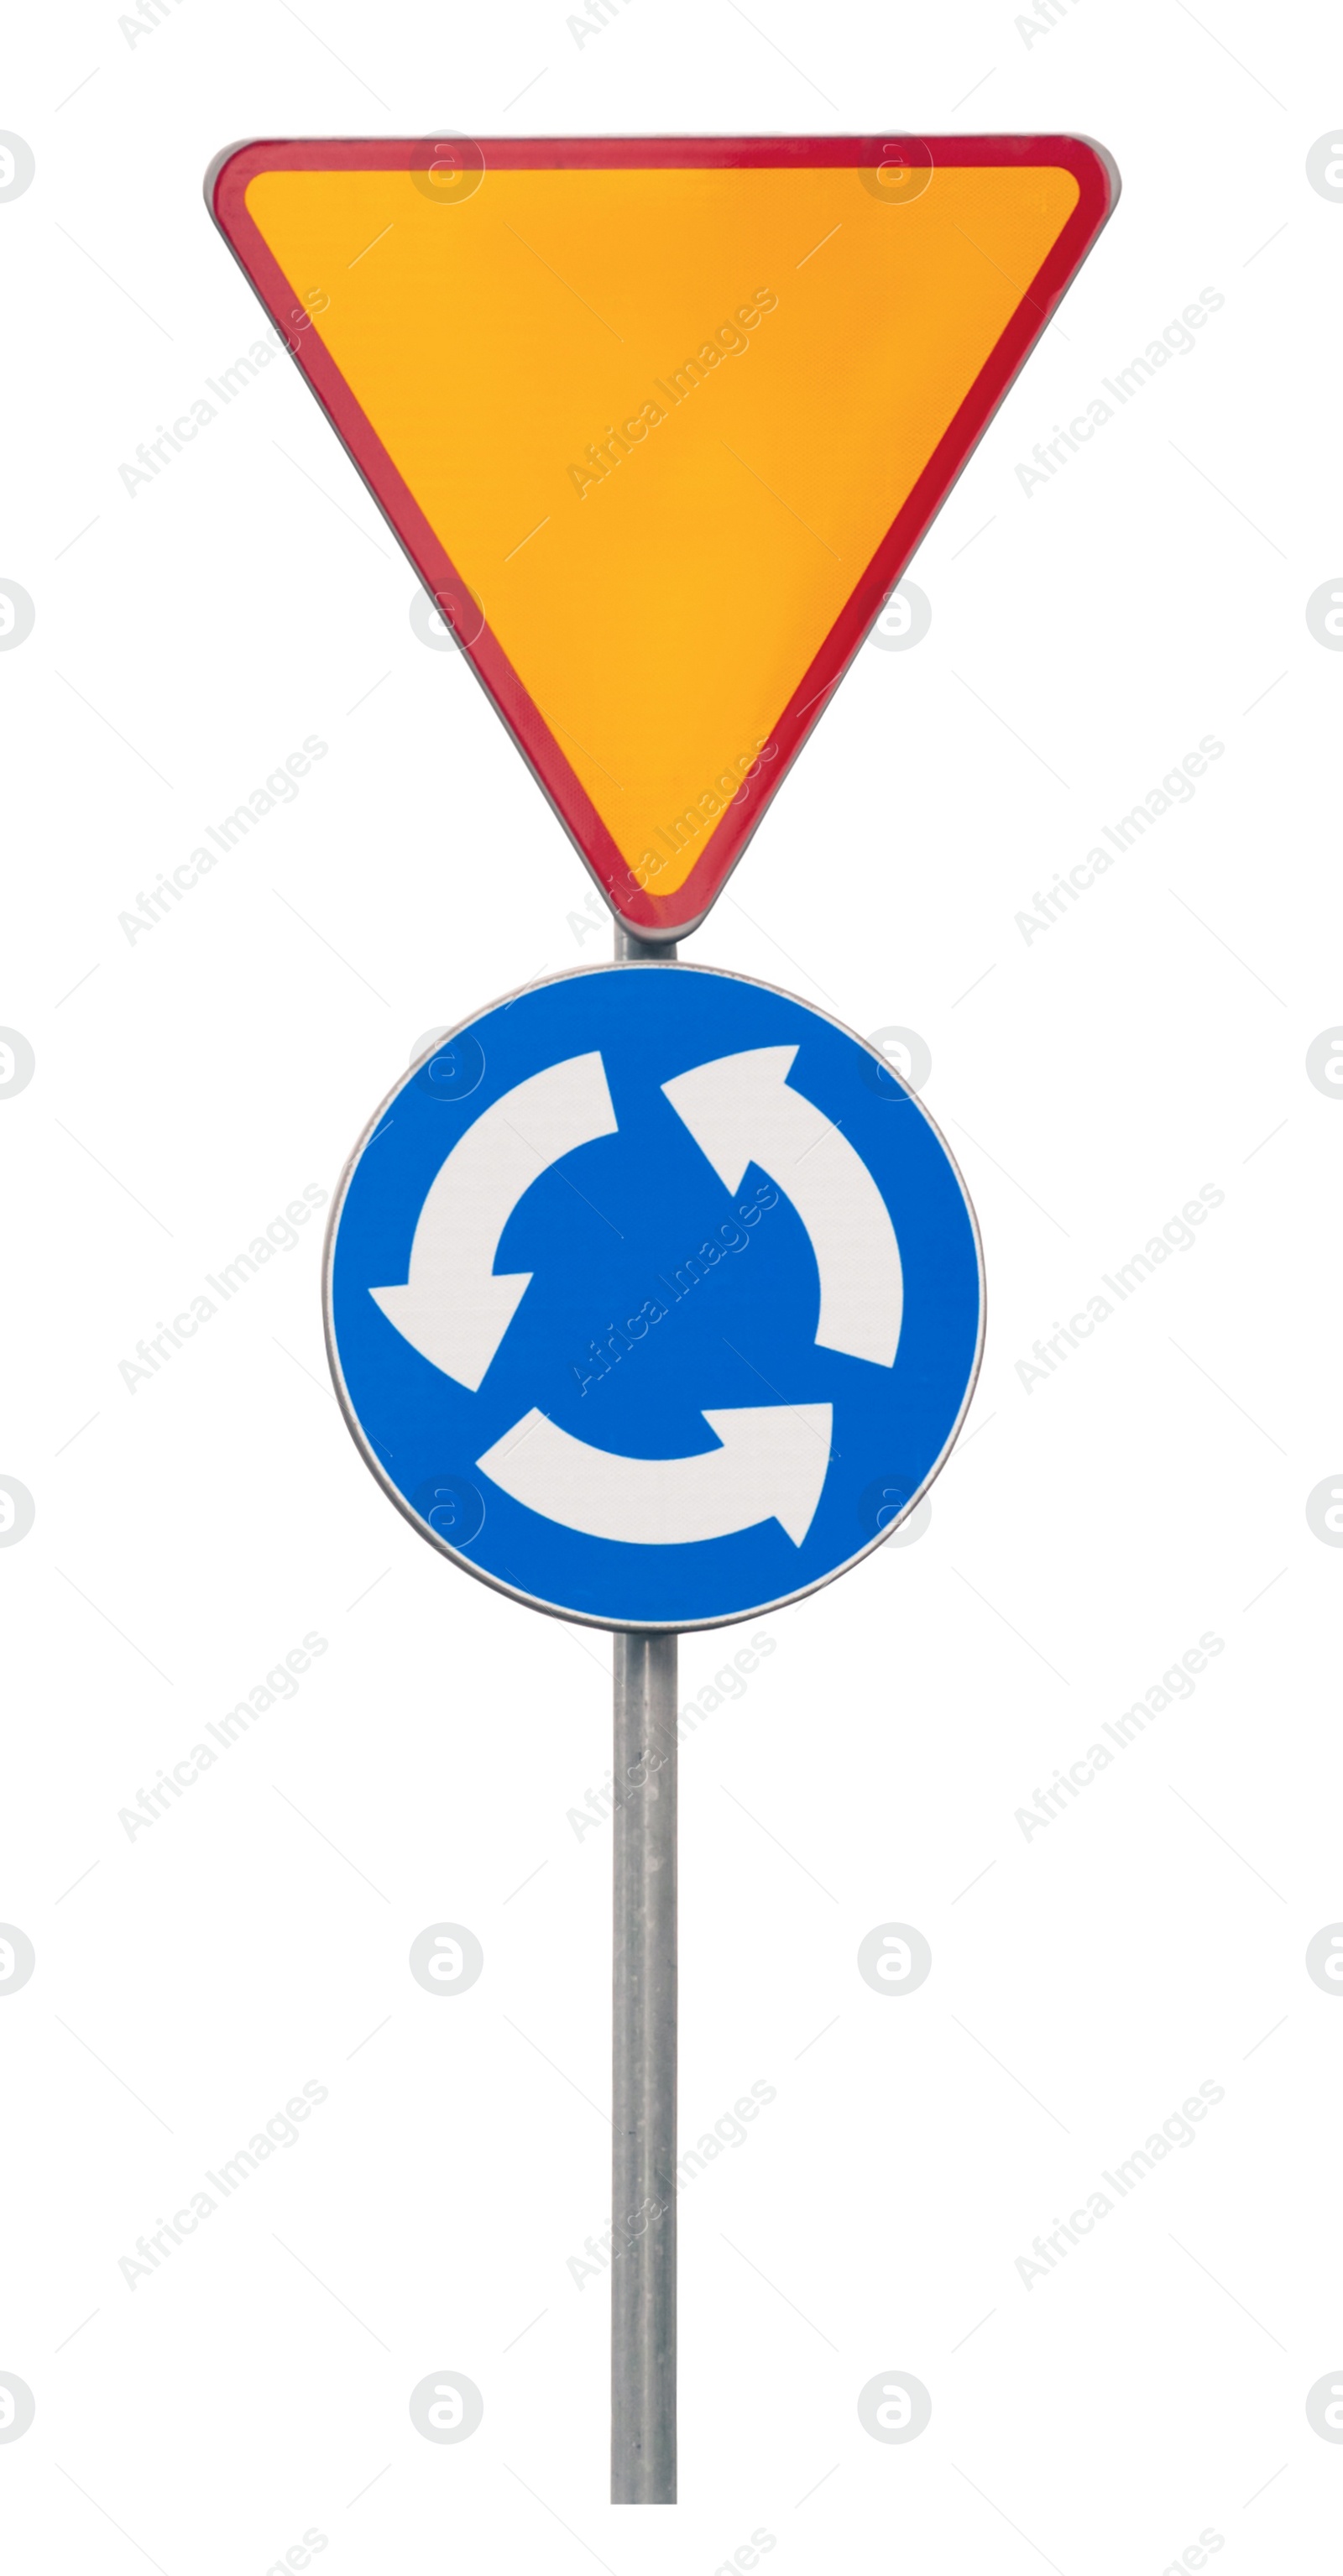 Image of Post with Roundabout and Yield road signs isolated on white